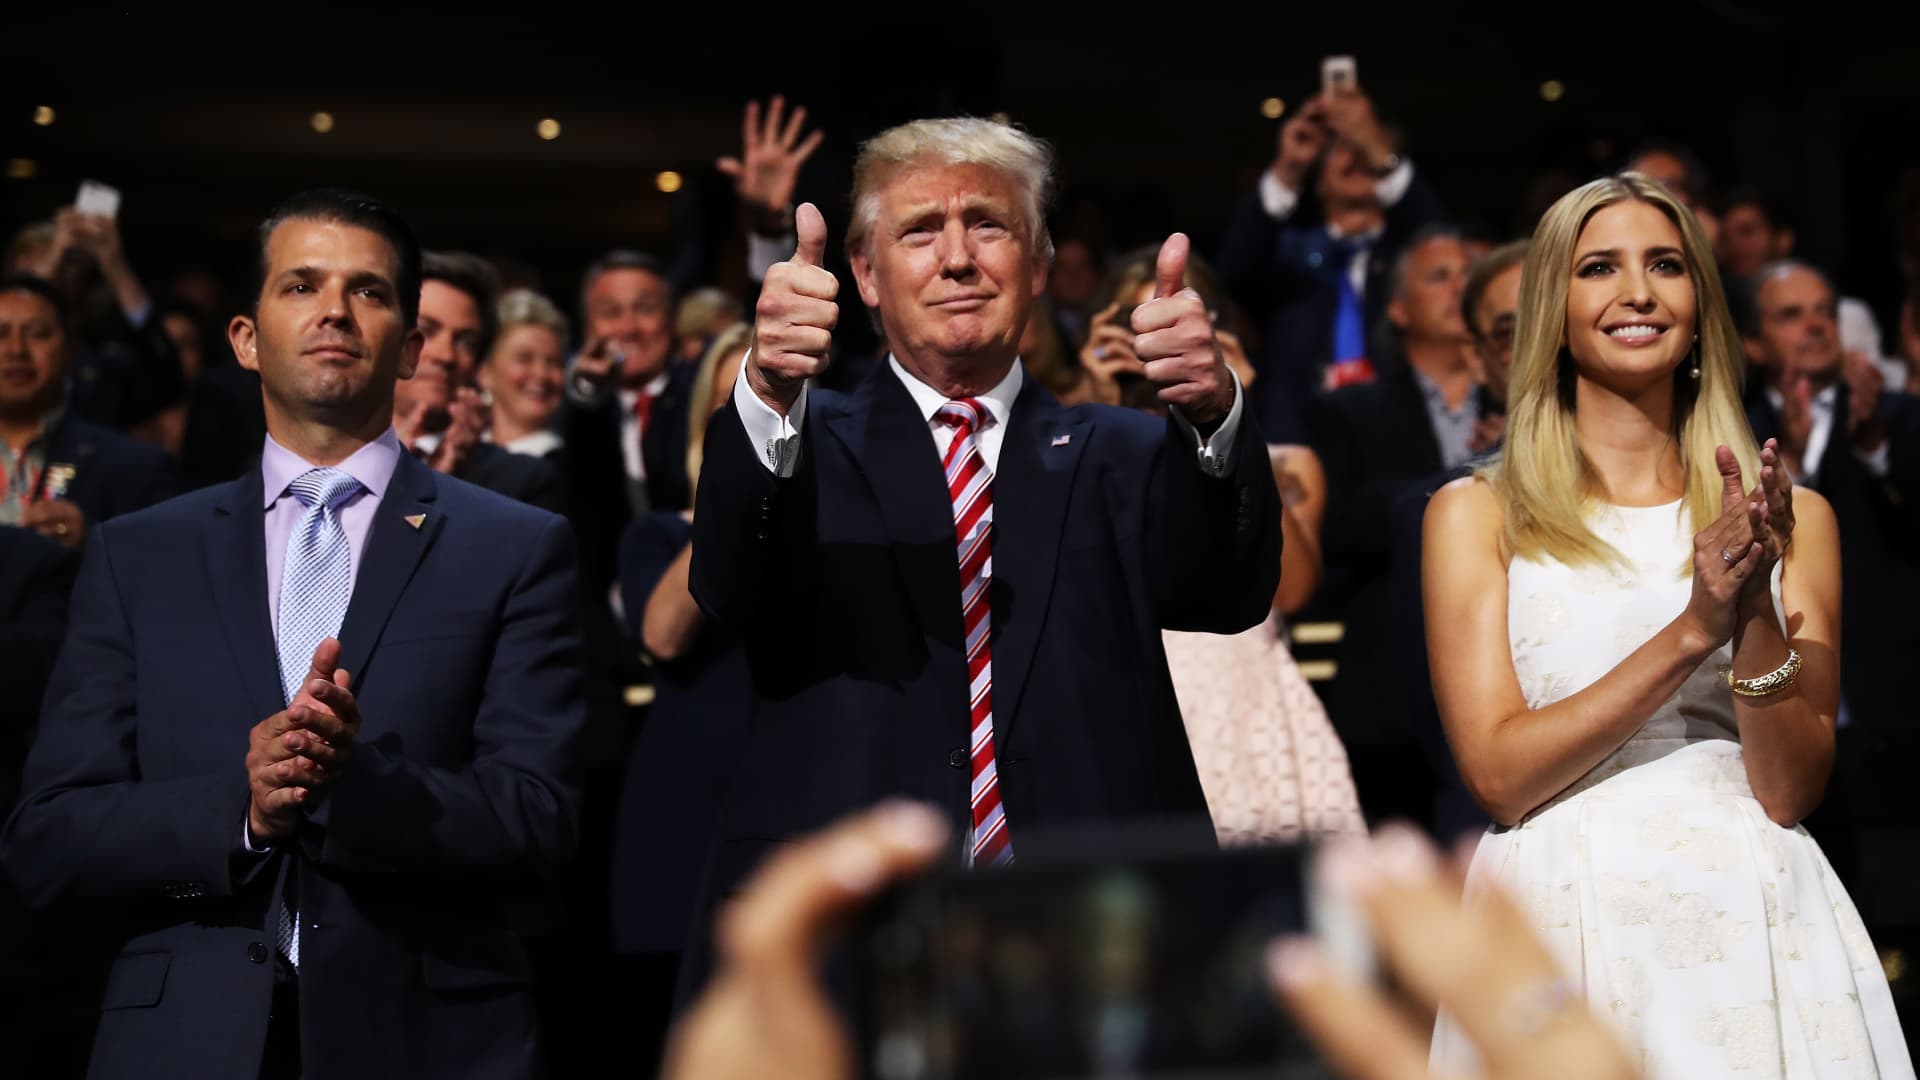 Republican presidential candidate Donald Trump (C) gives two thumbs up as Donald Trump Jr. (L) and Ivanka Trump (R) stand and cheer for Eric Trump as he delivers his speech during the third day of the Republican National Convention on July 20, 2016 at the Quicken Loans Arena in Cleveland, Ohio.